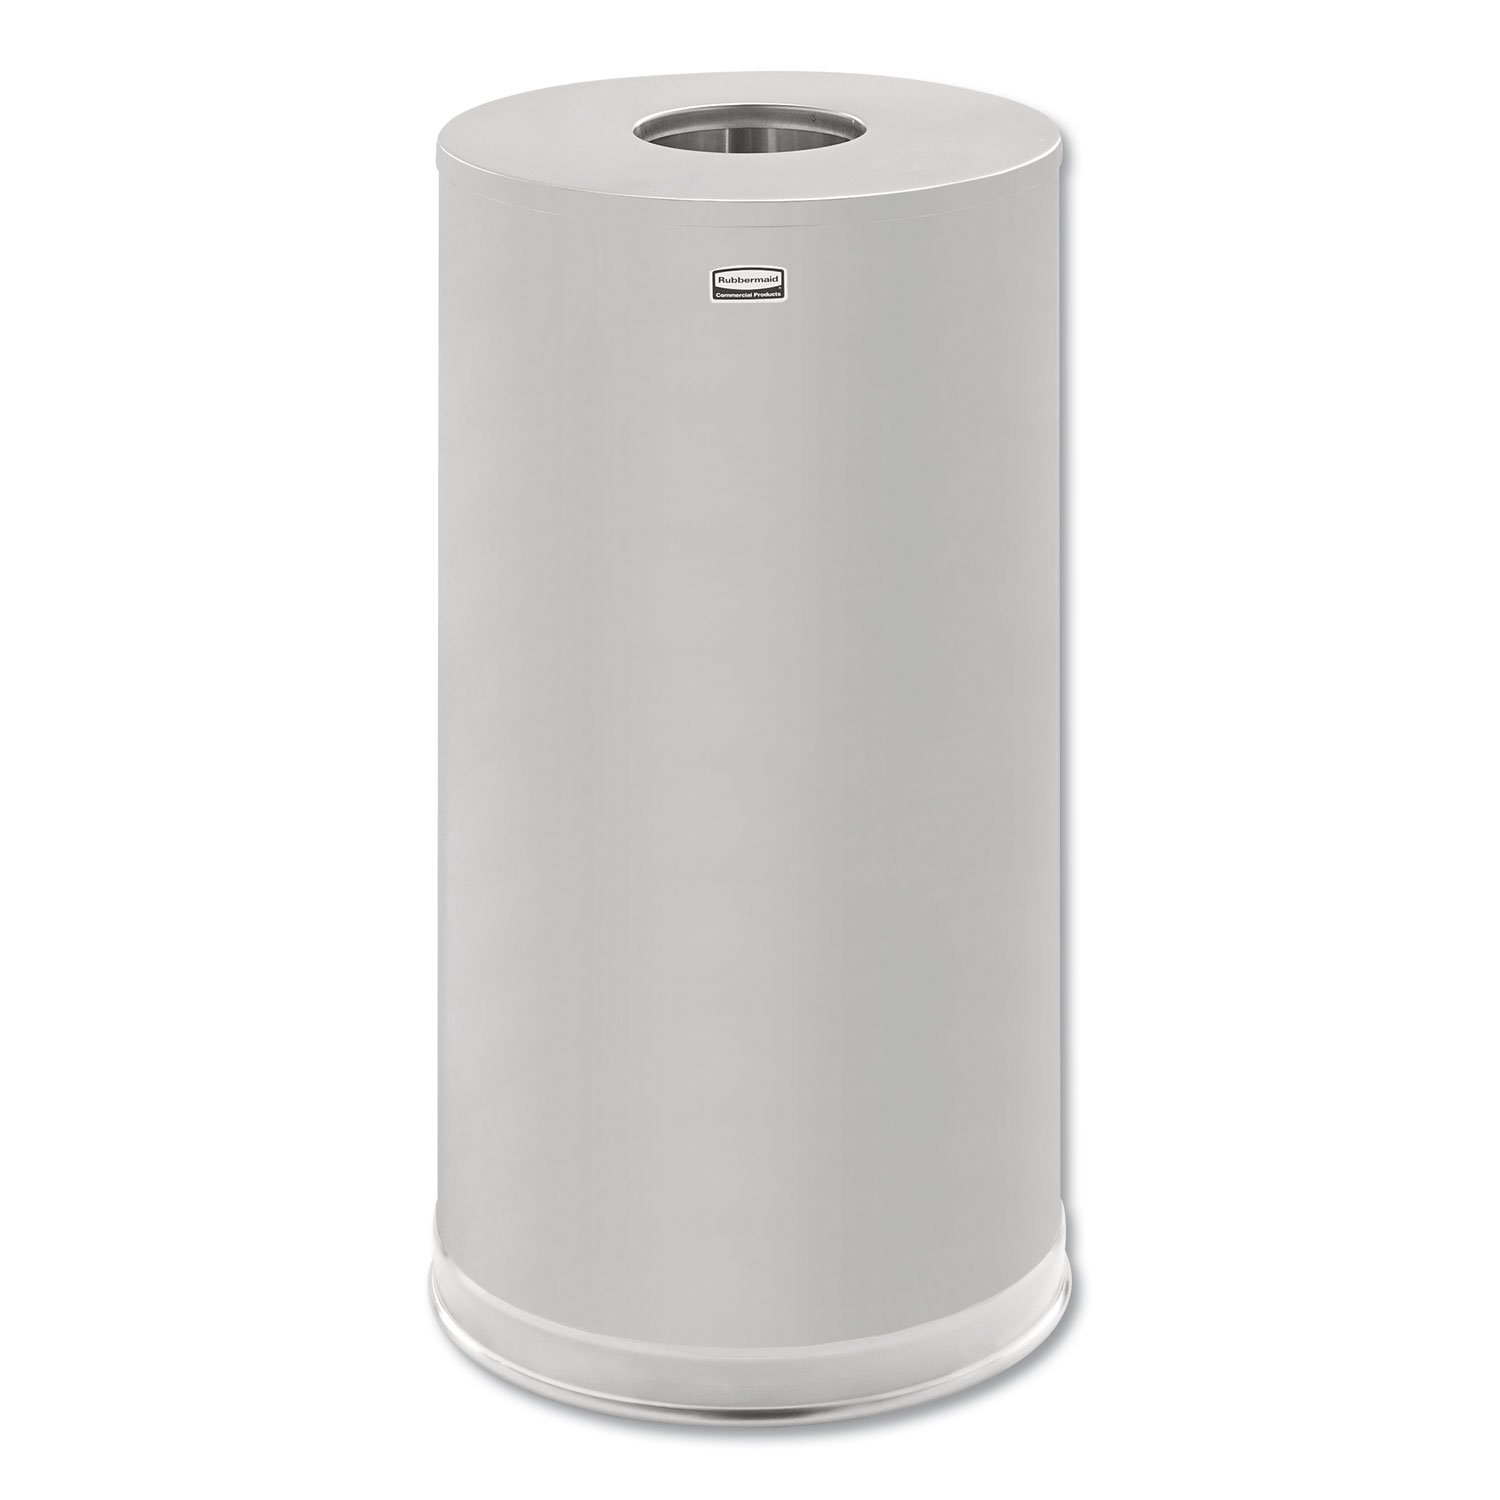  Rubbermaid Commercial FGCC16SSSGL European and Metallic Series Drop-In Top Receptacle, Round, 15 gal, Satin Stainless (RCPCC16SSSGL) 